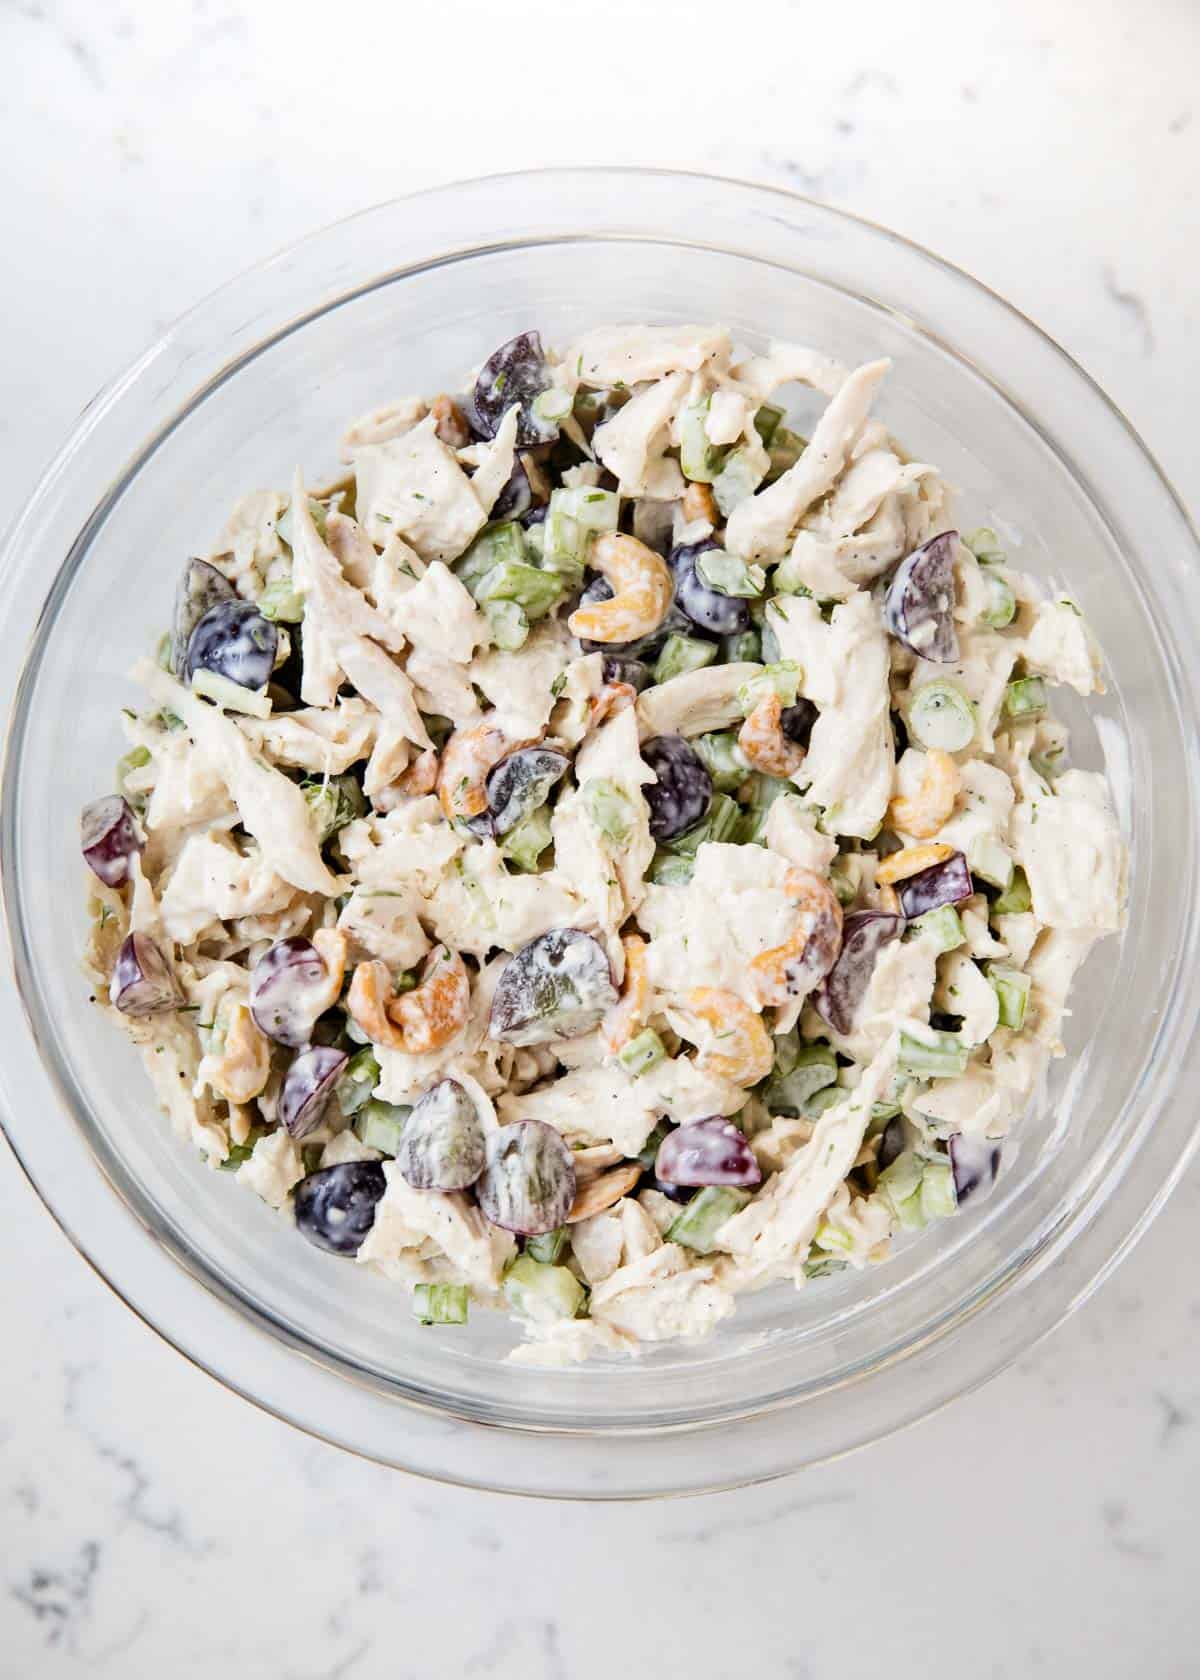 Chicken salad with grapes in bowl.